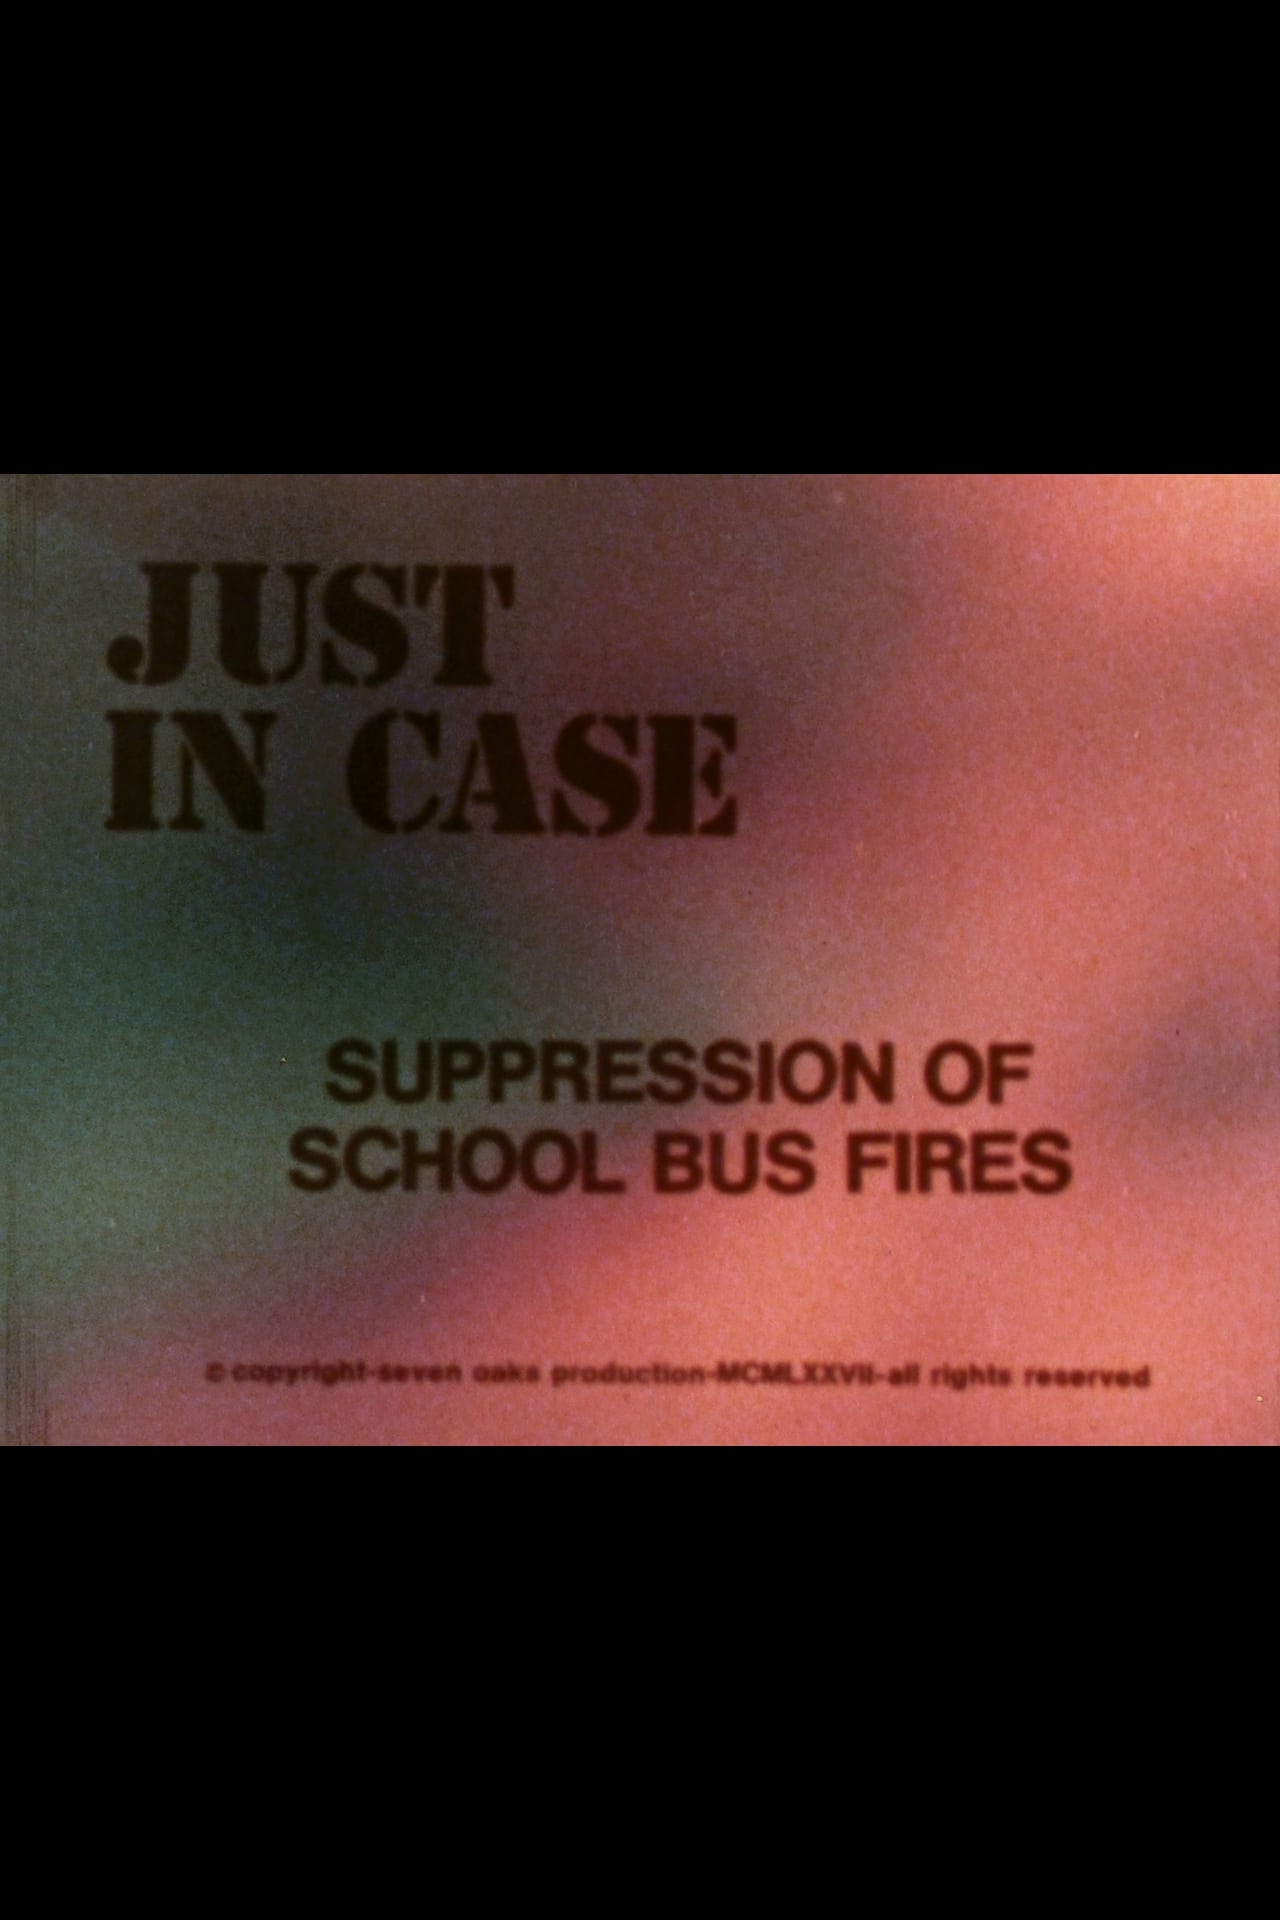 Just in Case: Suppression of School Bus Fires